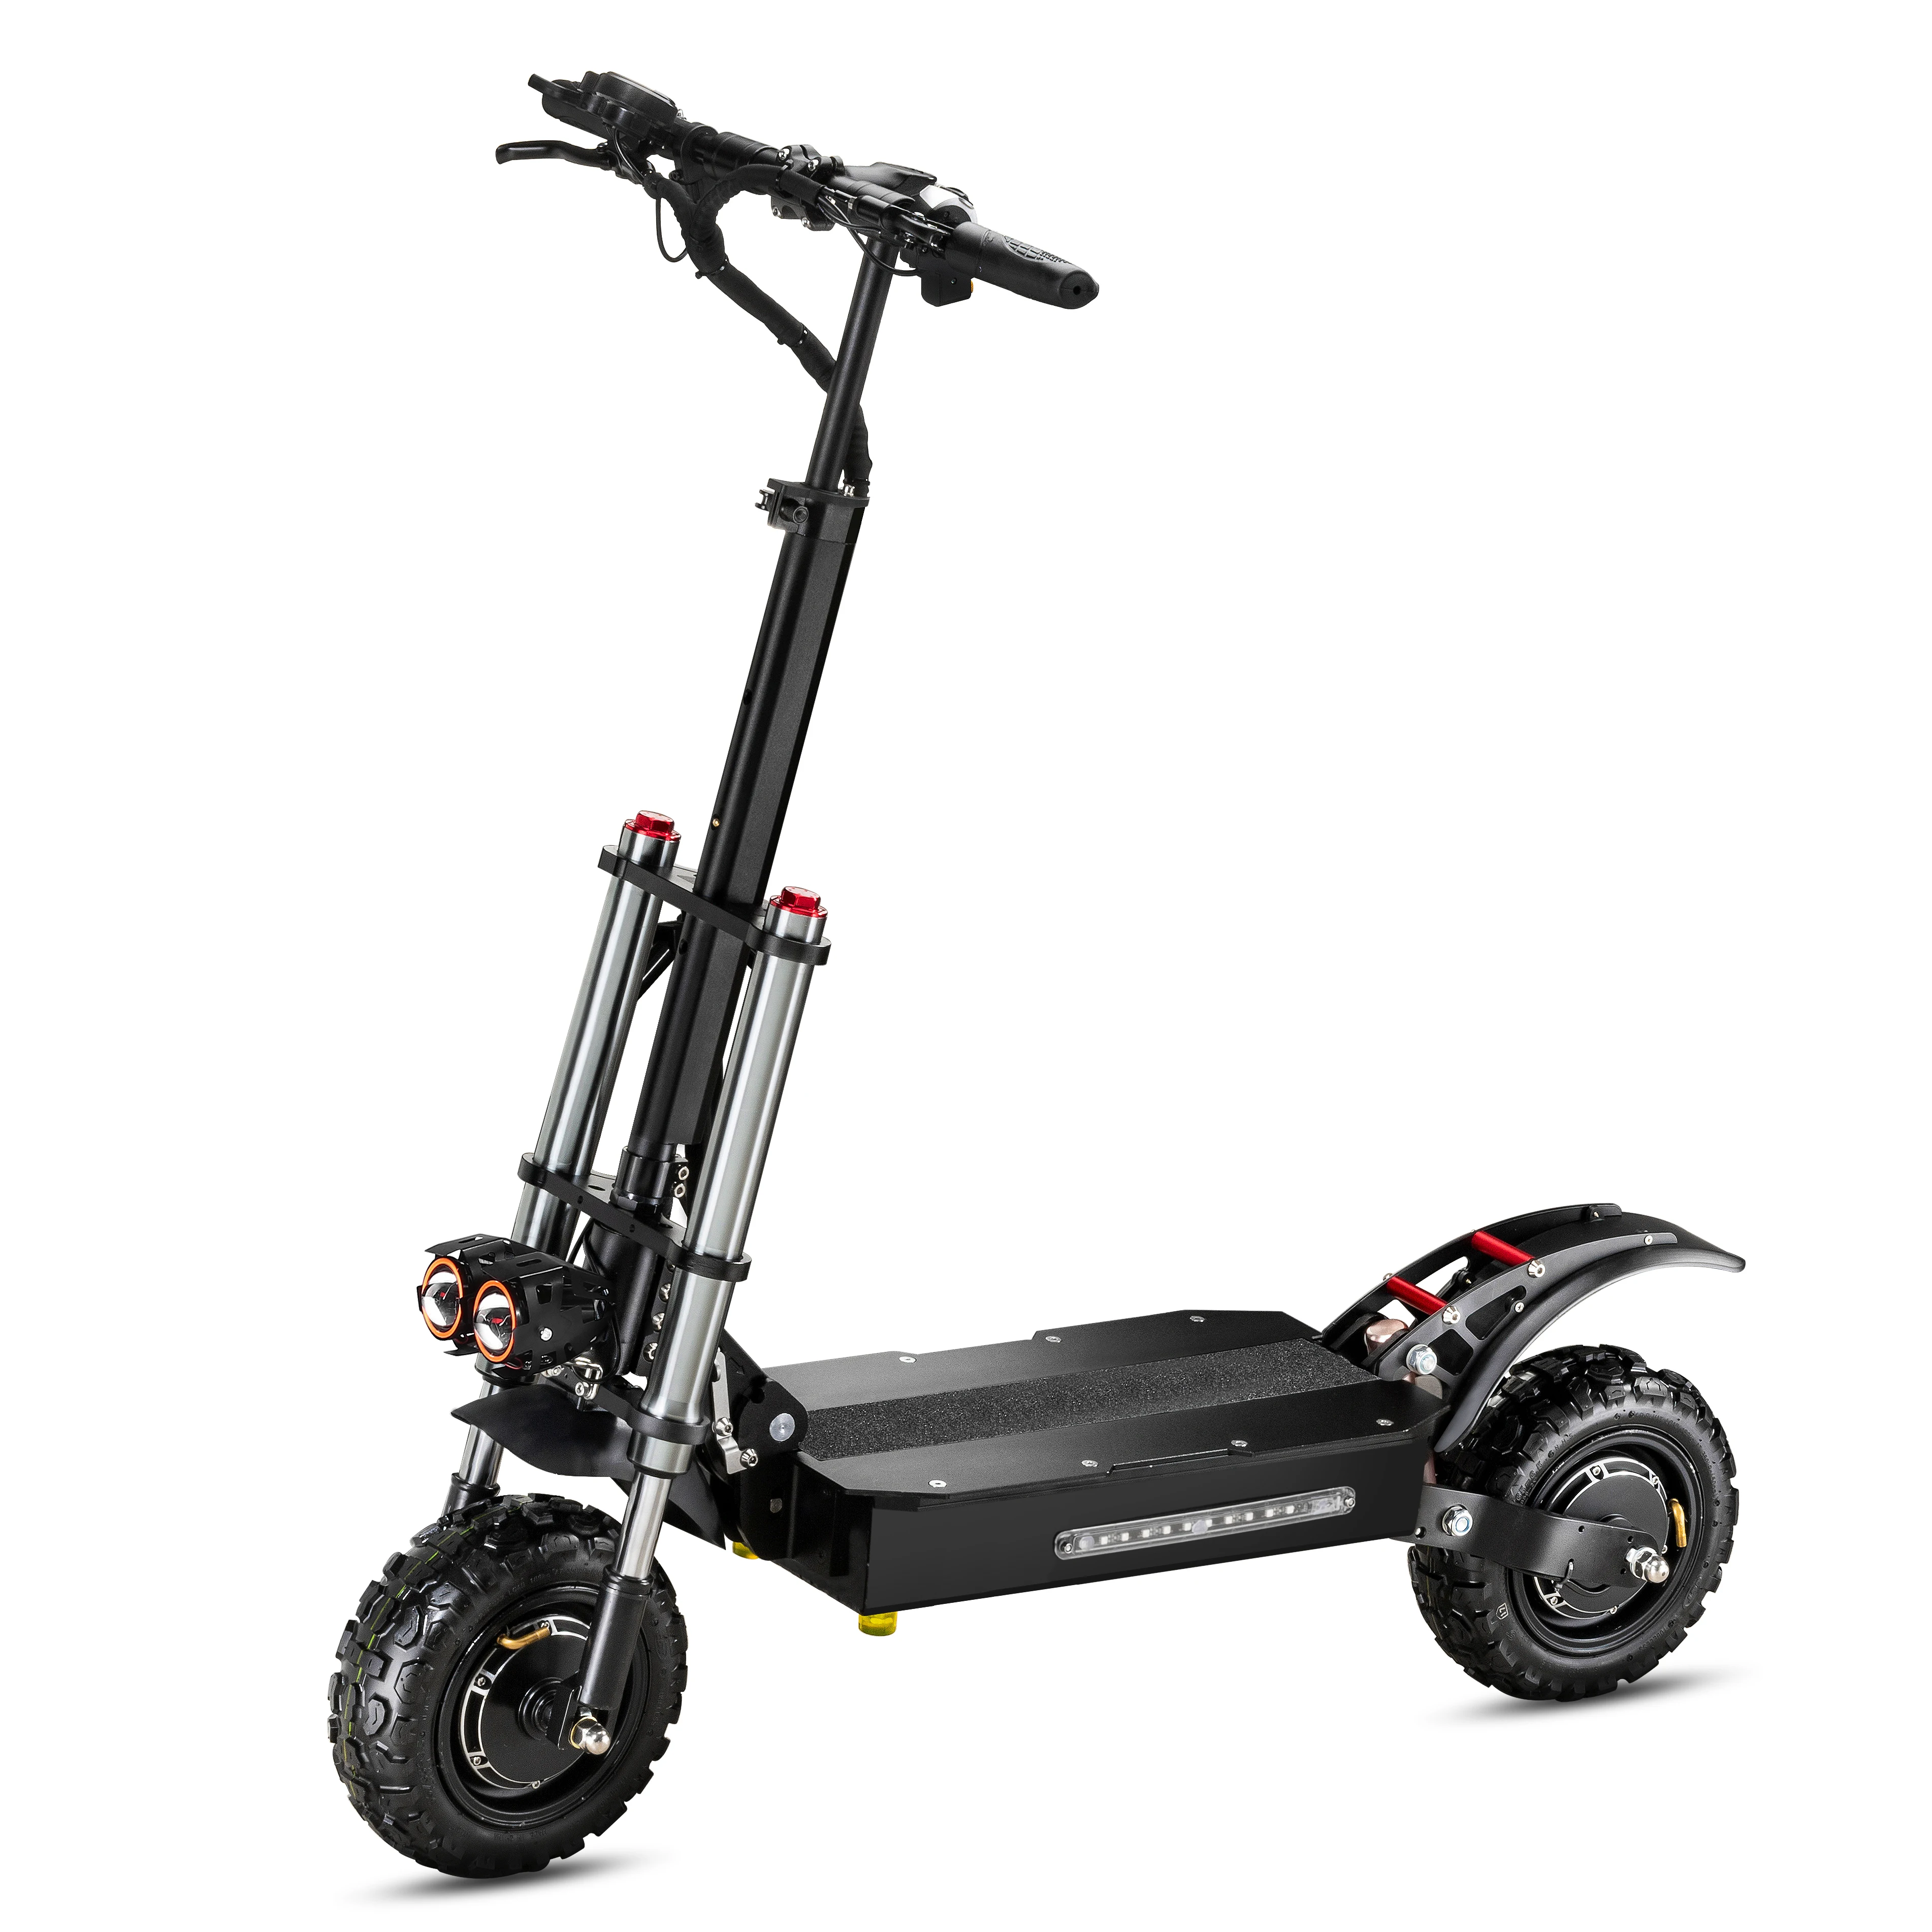 

EU STOCK Dual Motor 5600w 60v 38AH Electric Scooter 11 Inch Fat Tire fast adult electric scooter eu warehouse 80km/h